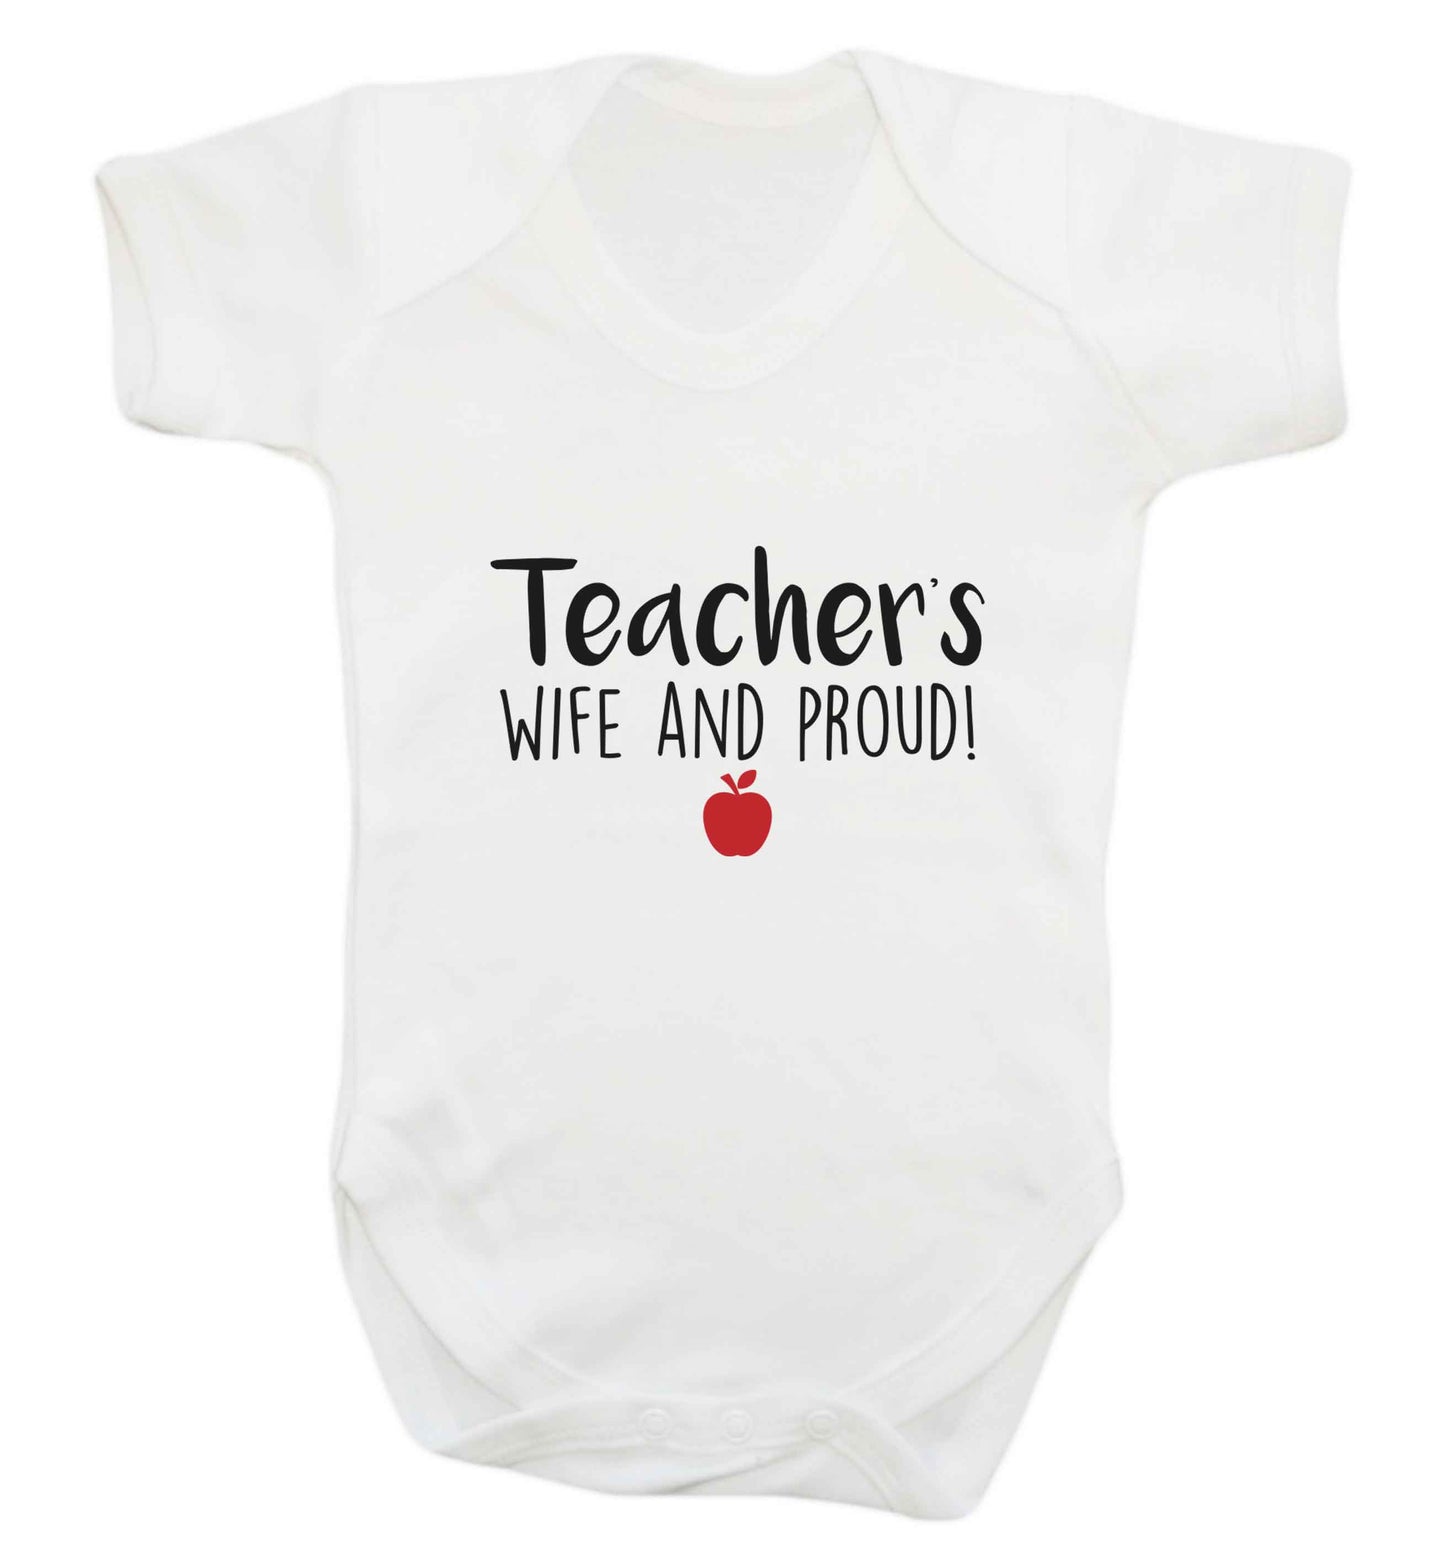 Teachers wife and proud baby vest white 18-24 months